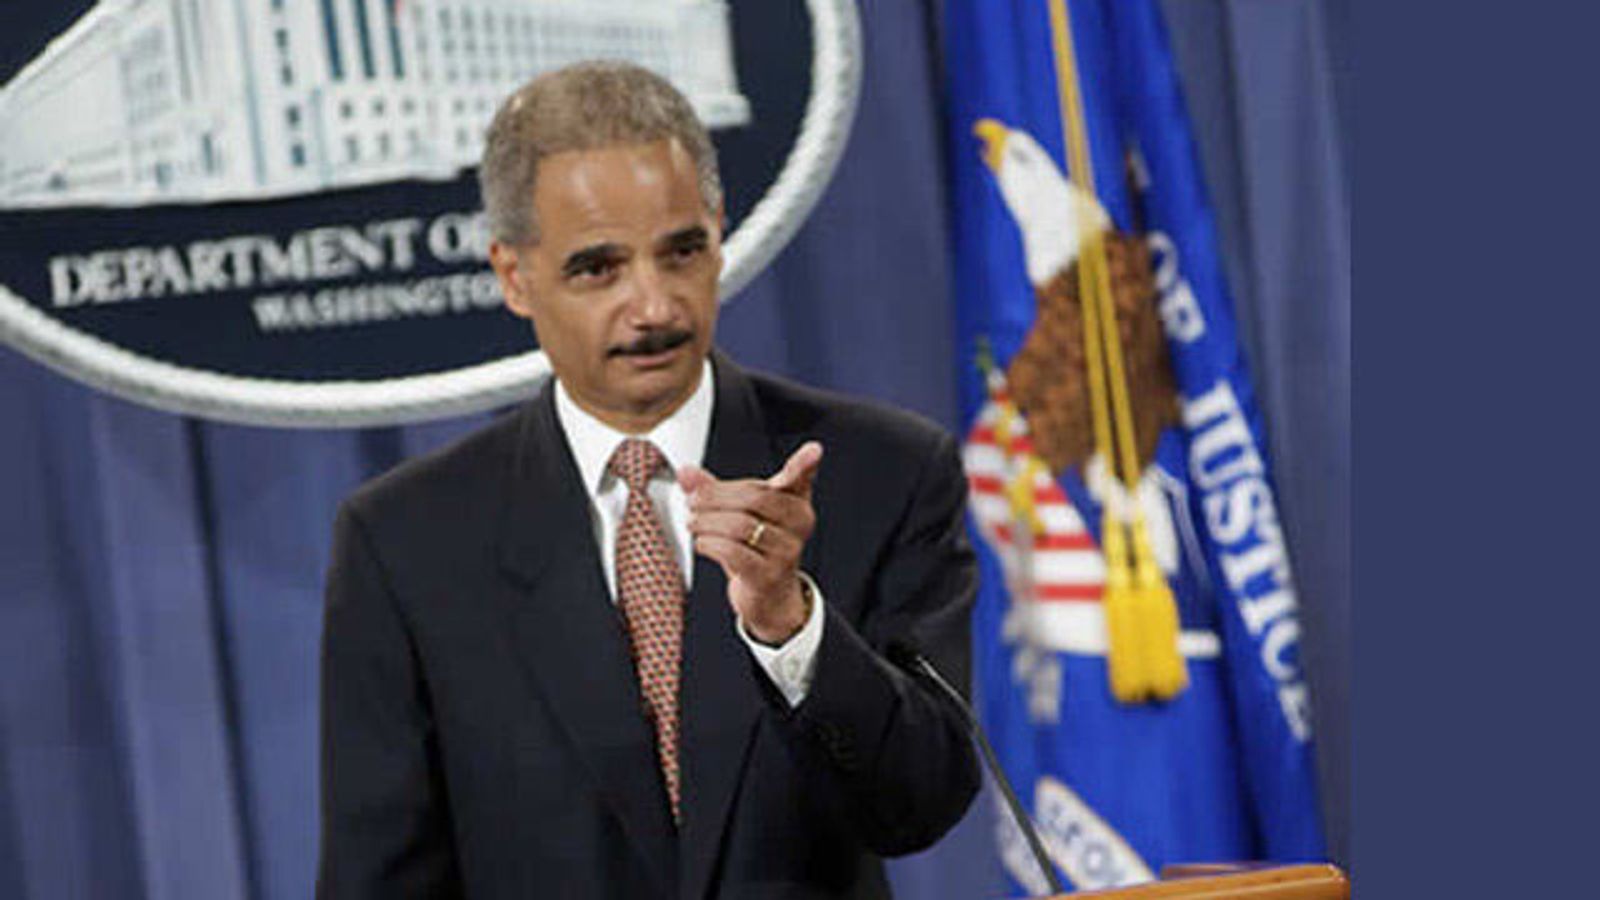 AG Holder to Remain On the Job; Is That Good for the Biz?